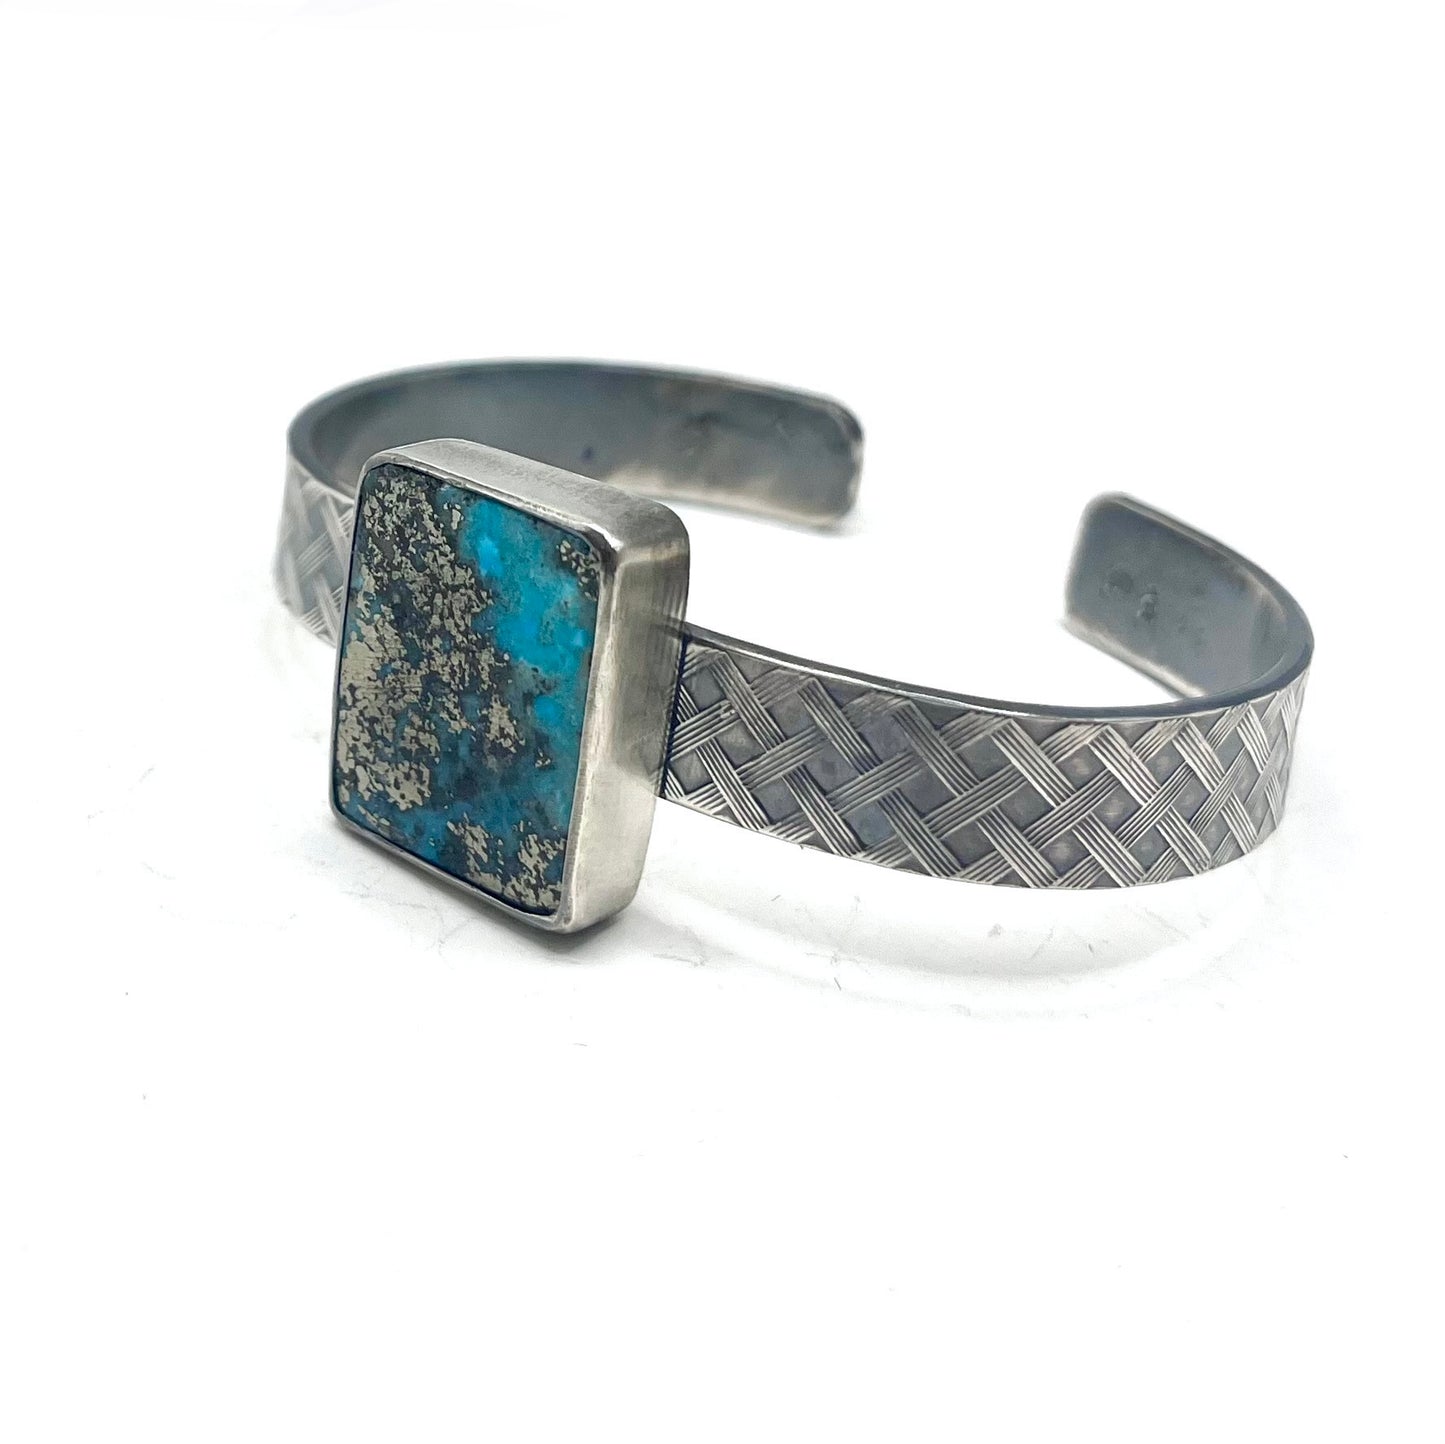 Turquoise and Pyrite Basket Pattern Cuff